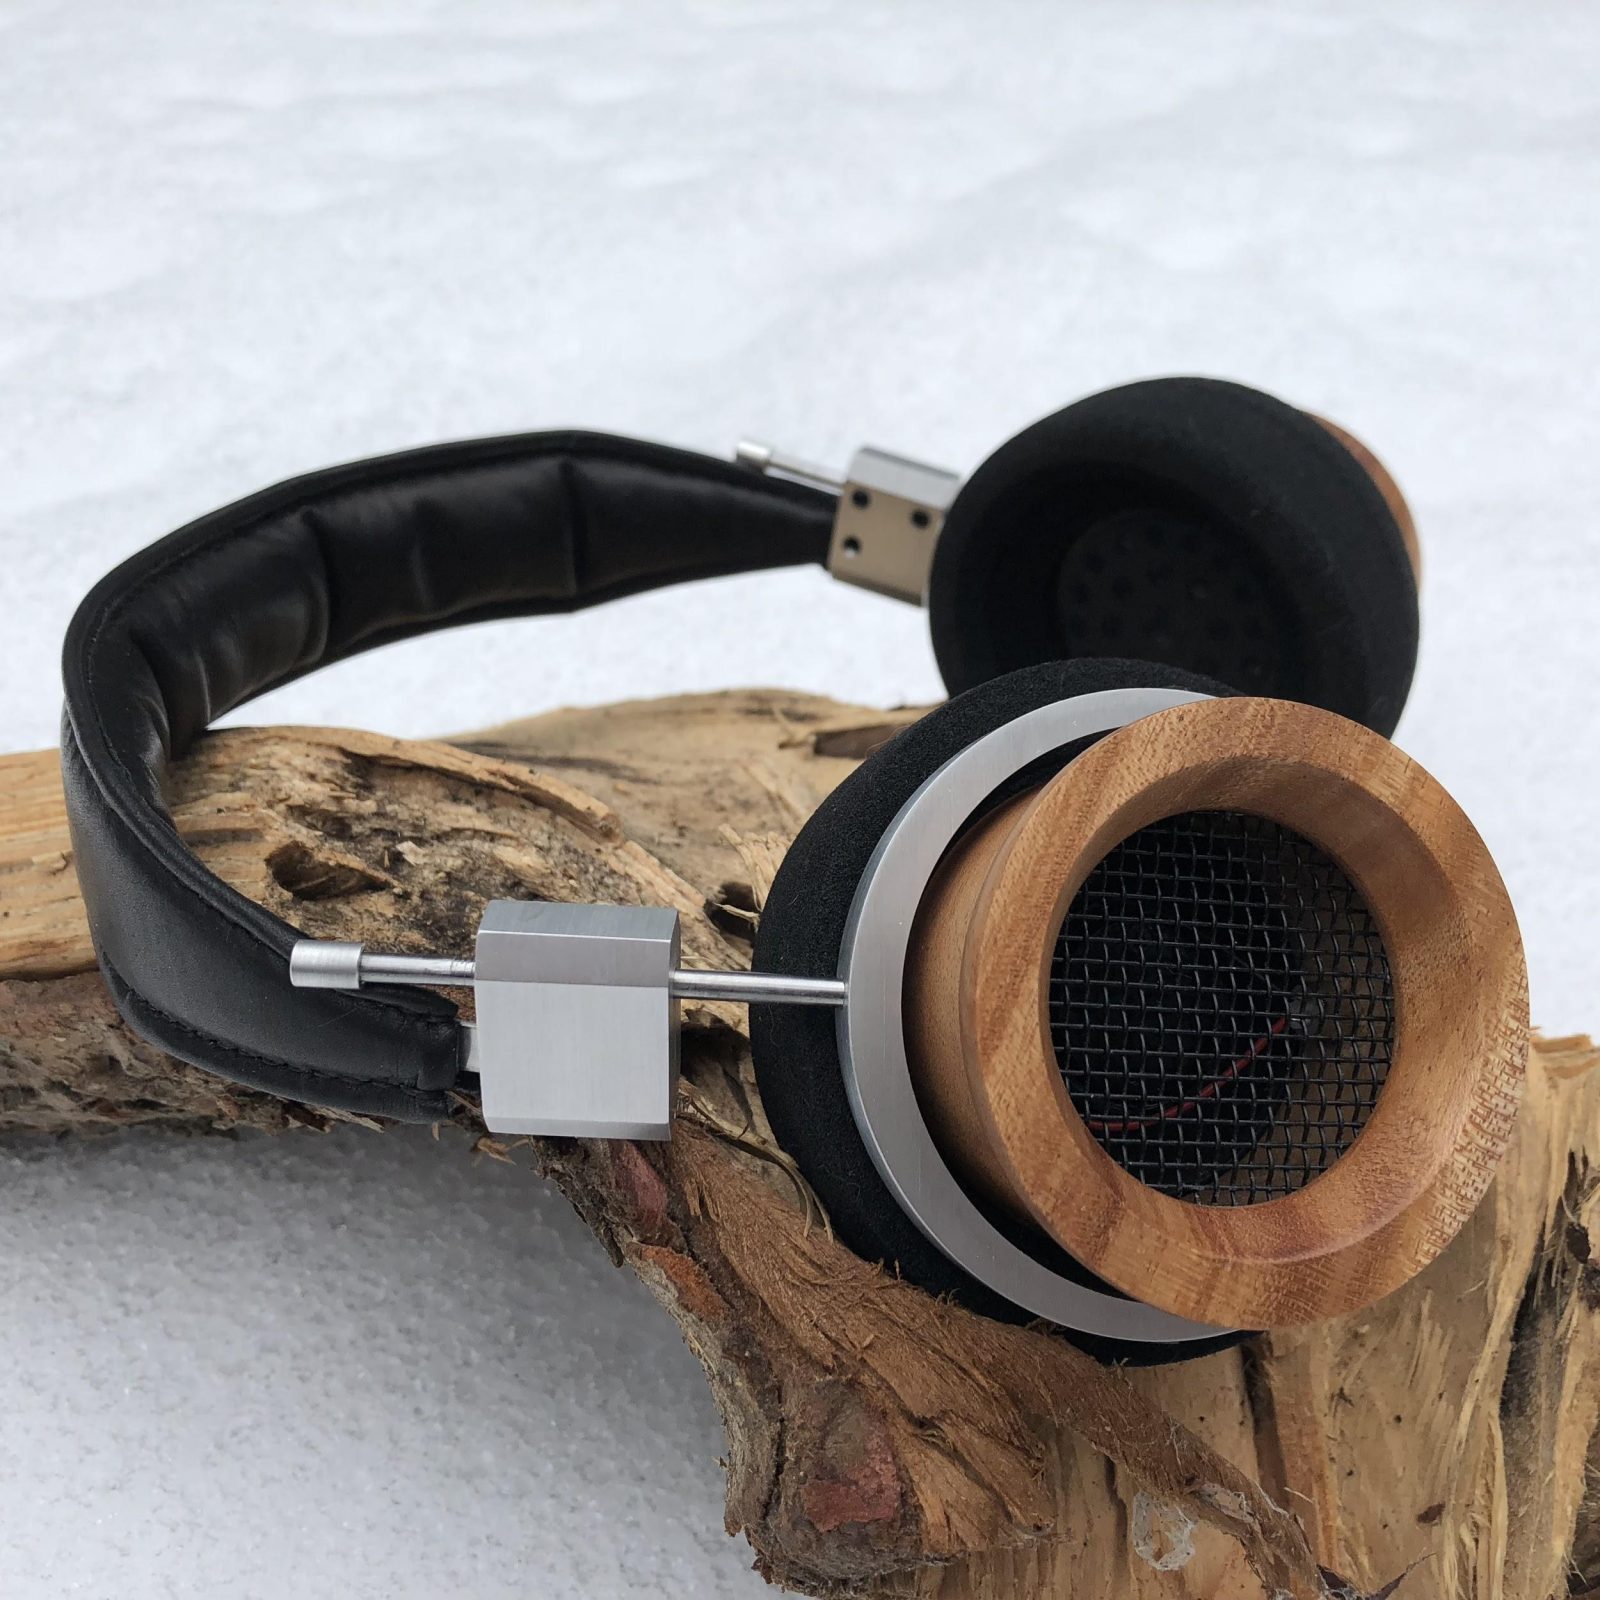 A completed modified Grado build from Shipibo Audio and Symphones